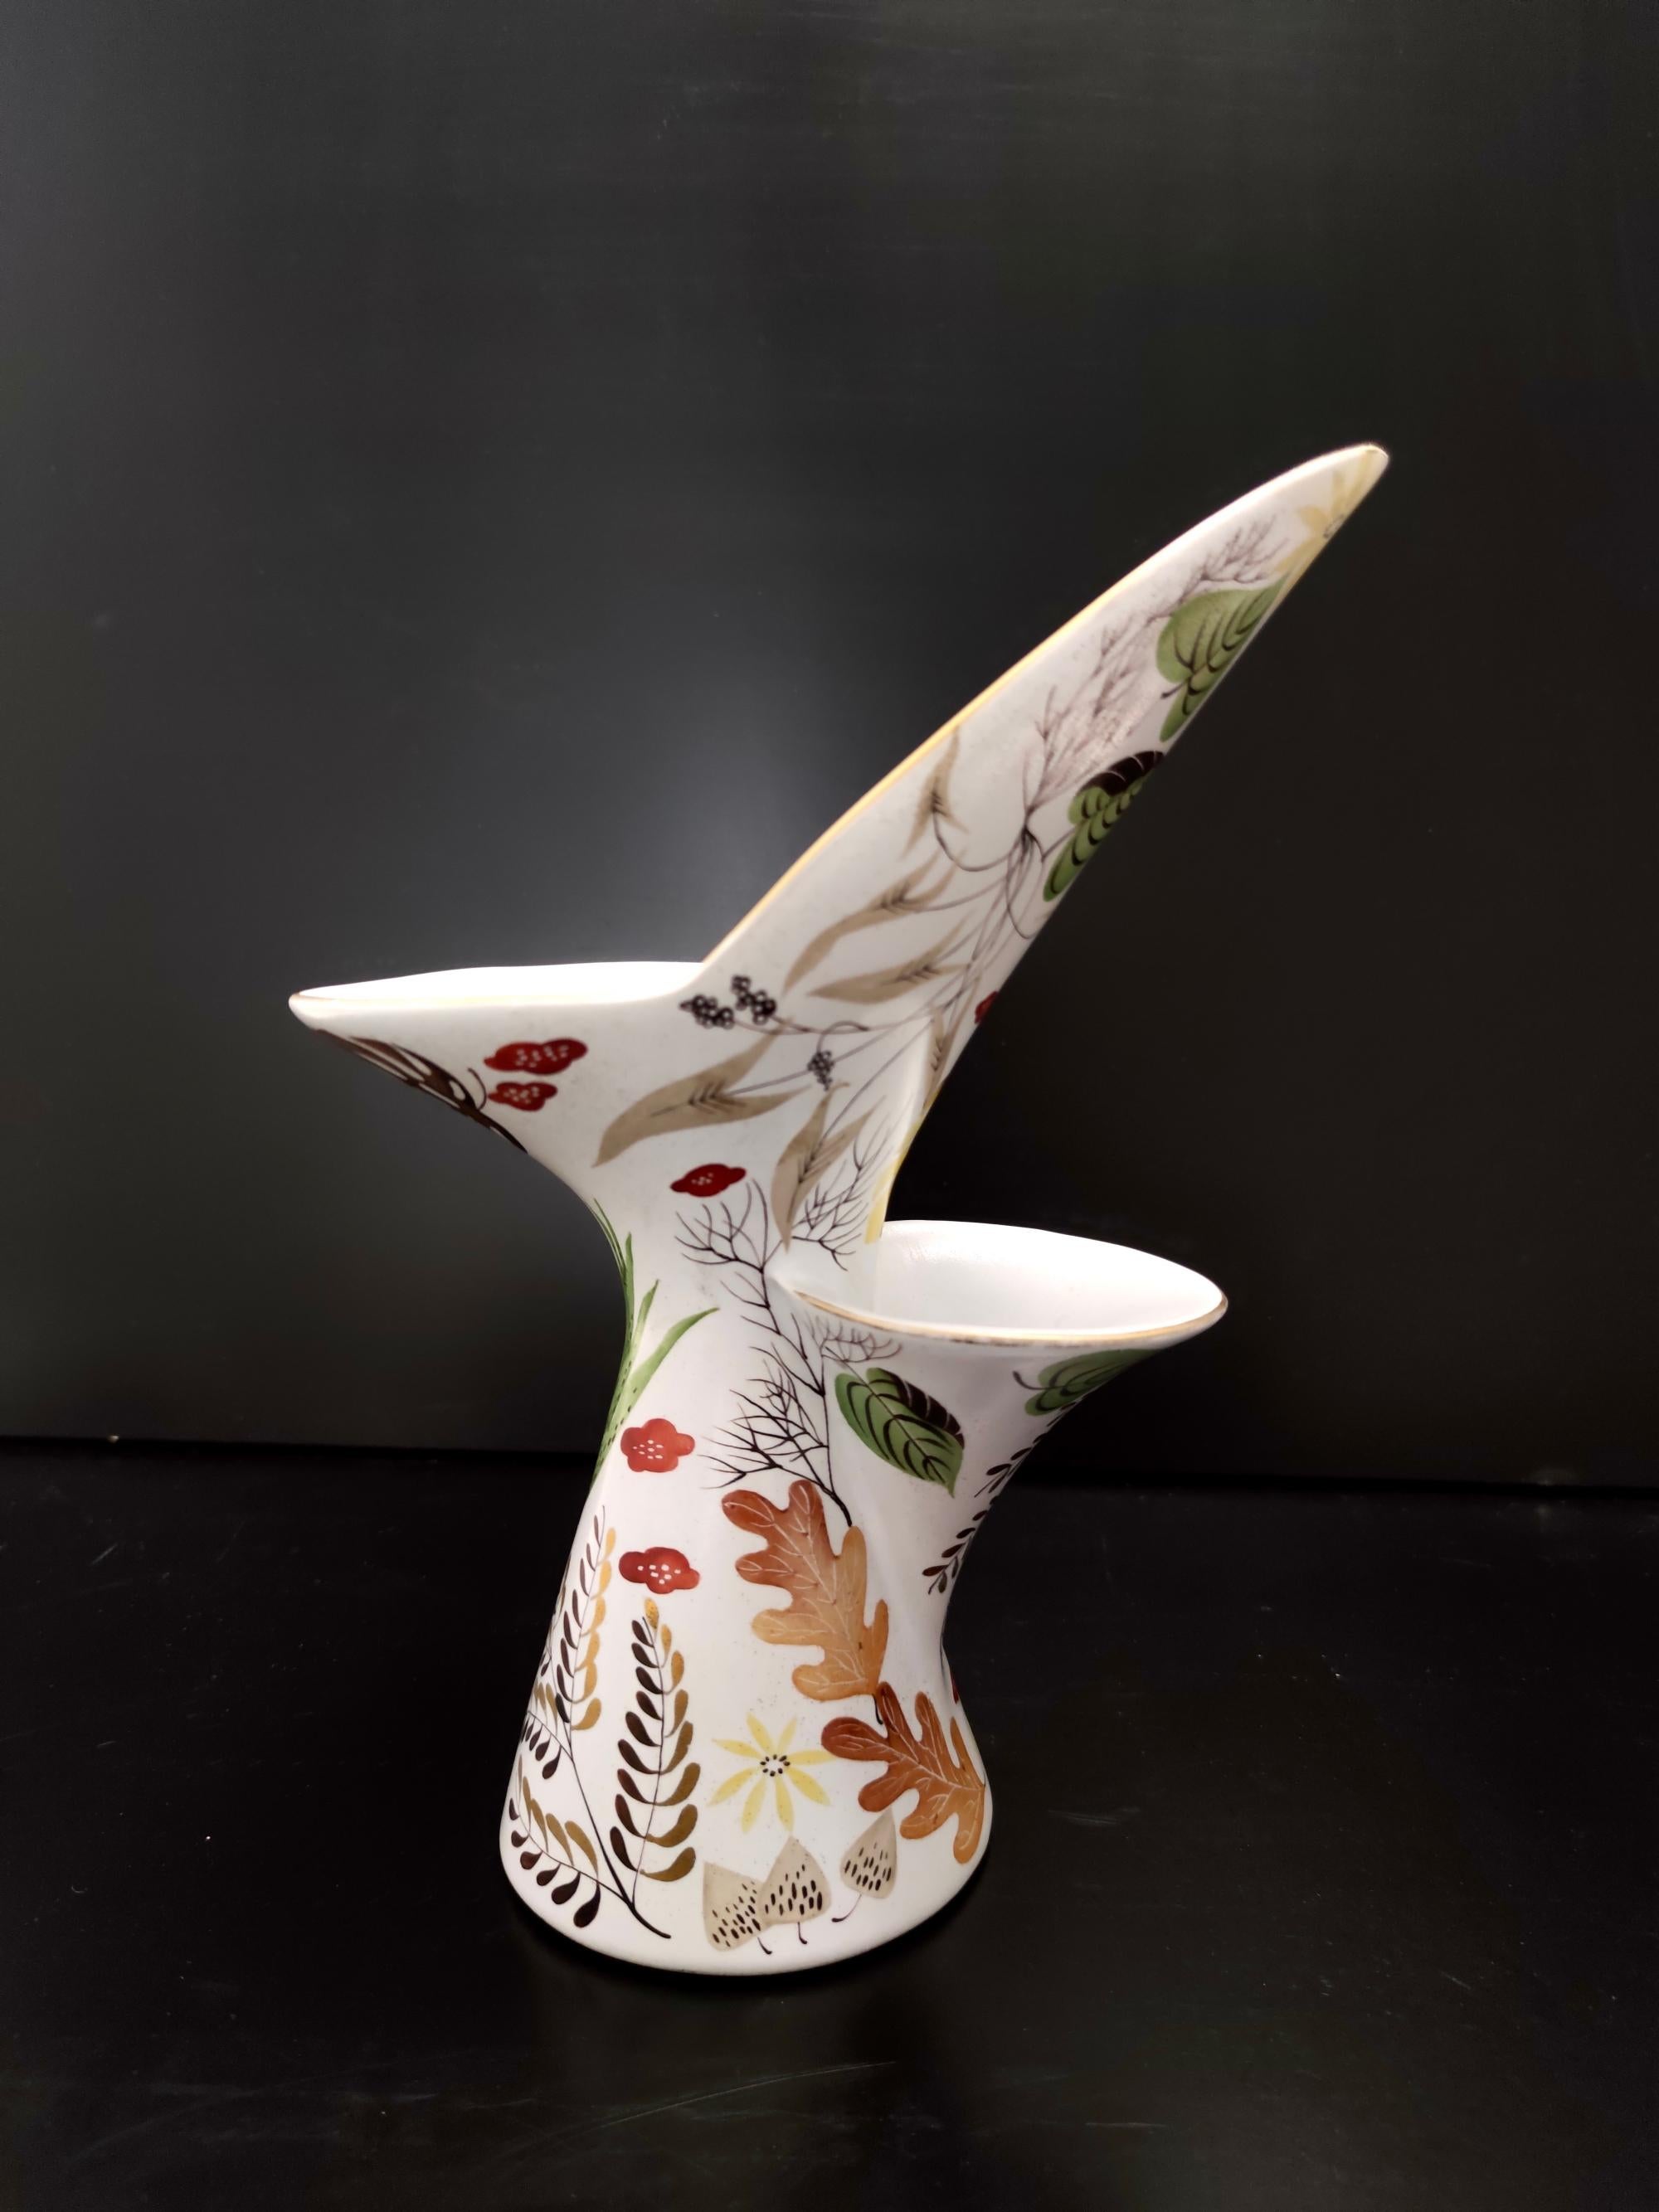 Rare Vintage Hand-painted Ceramic Vase by Antonia Campi for Lavenia, Italy In Excellent Condition For Sale In Bresso, Lombardy